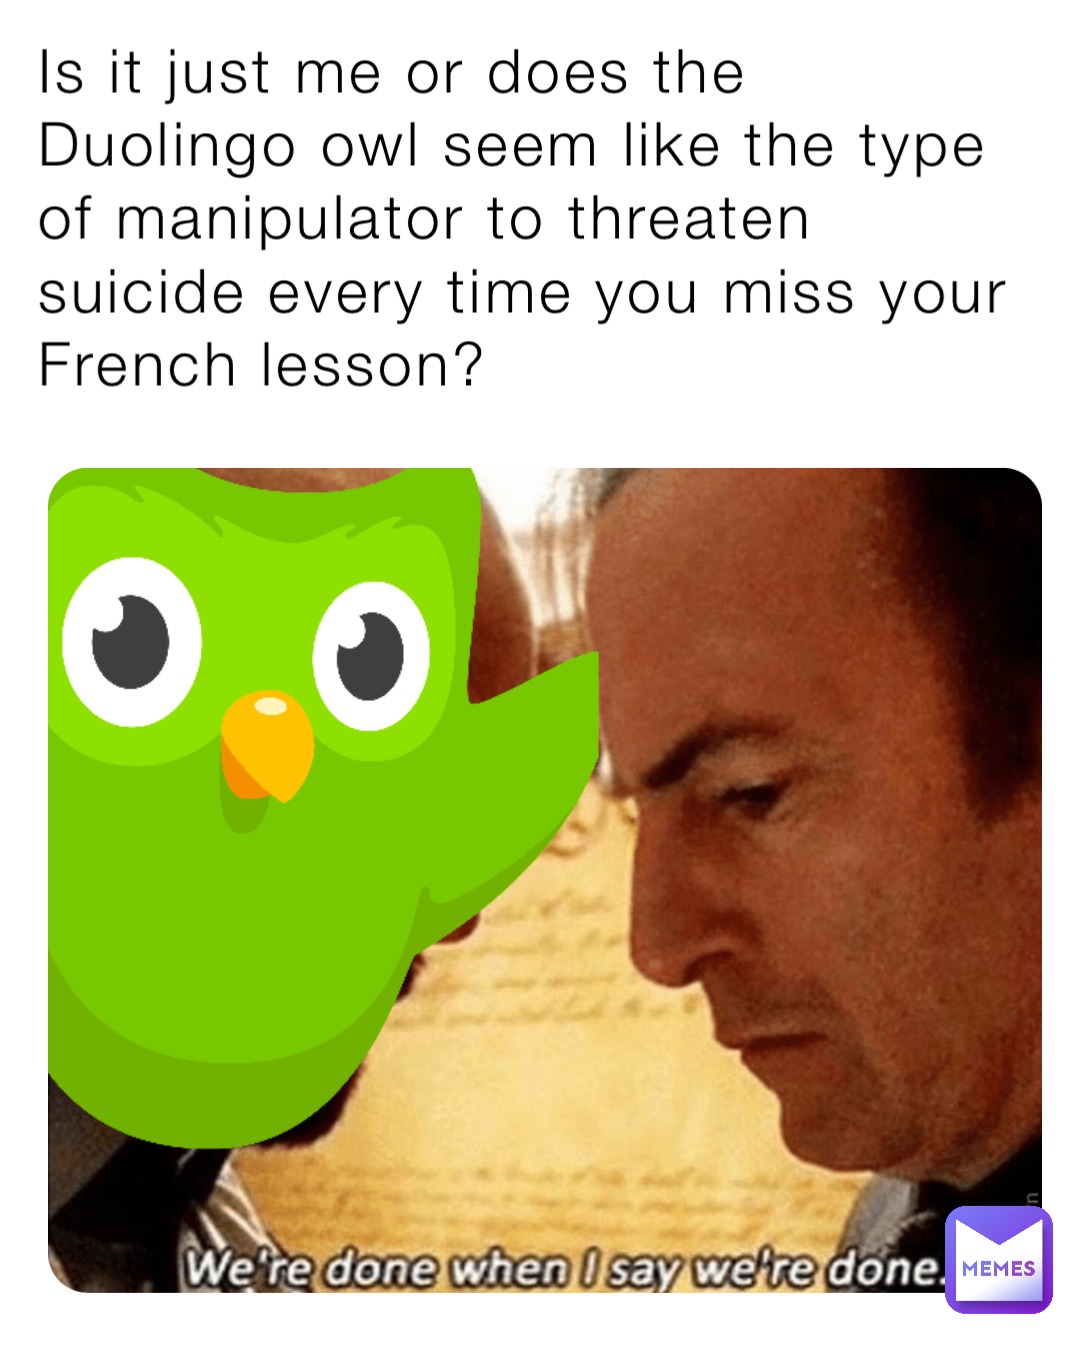 Is it just me or does the Duolingo owl seem like the type of manipulator to threaten suicide every time you miss your French lesson?